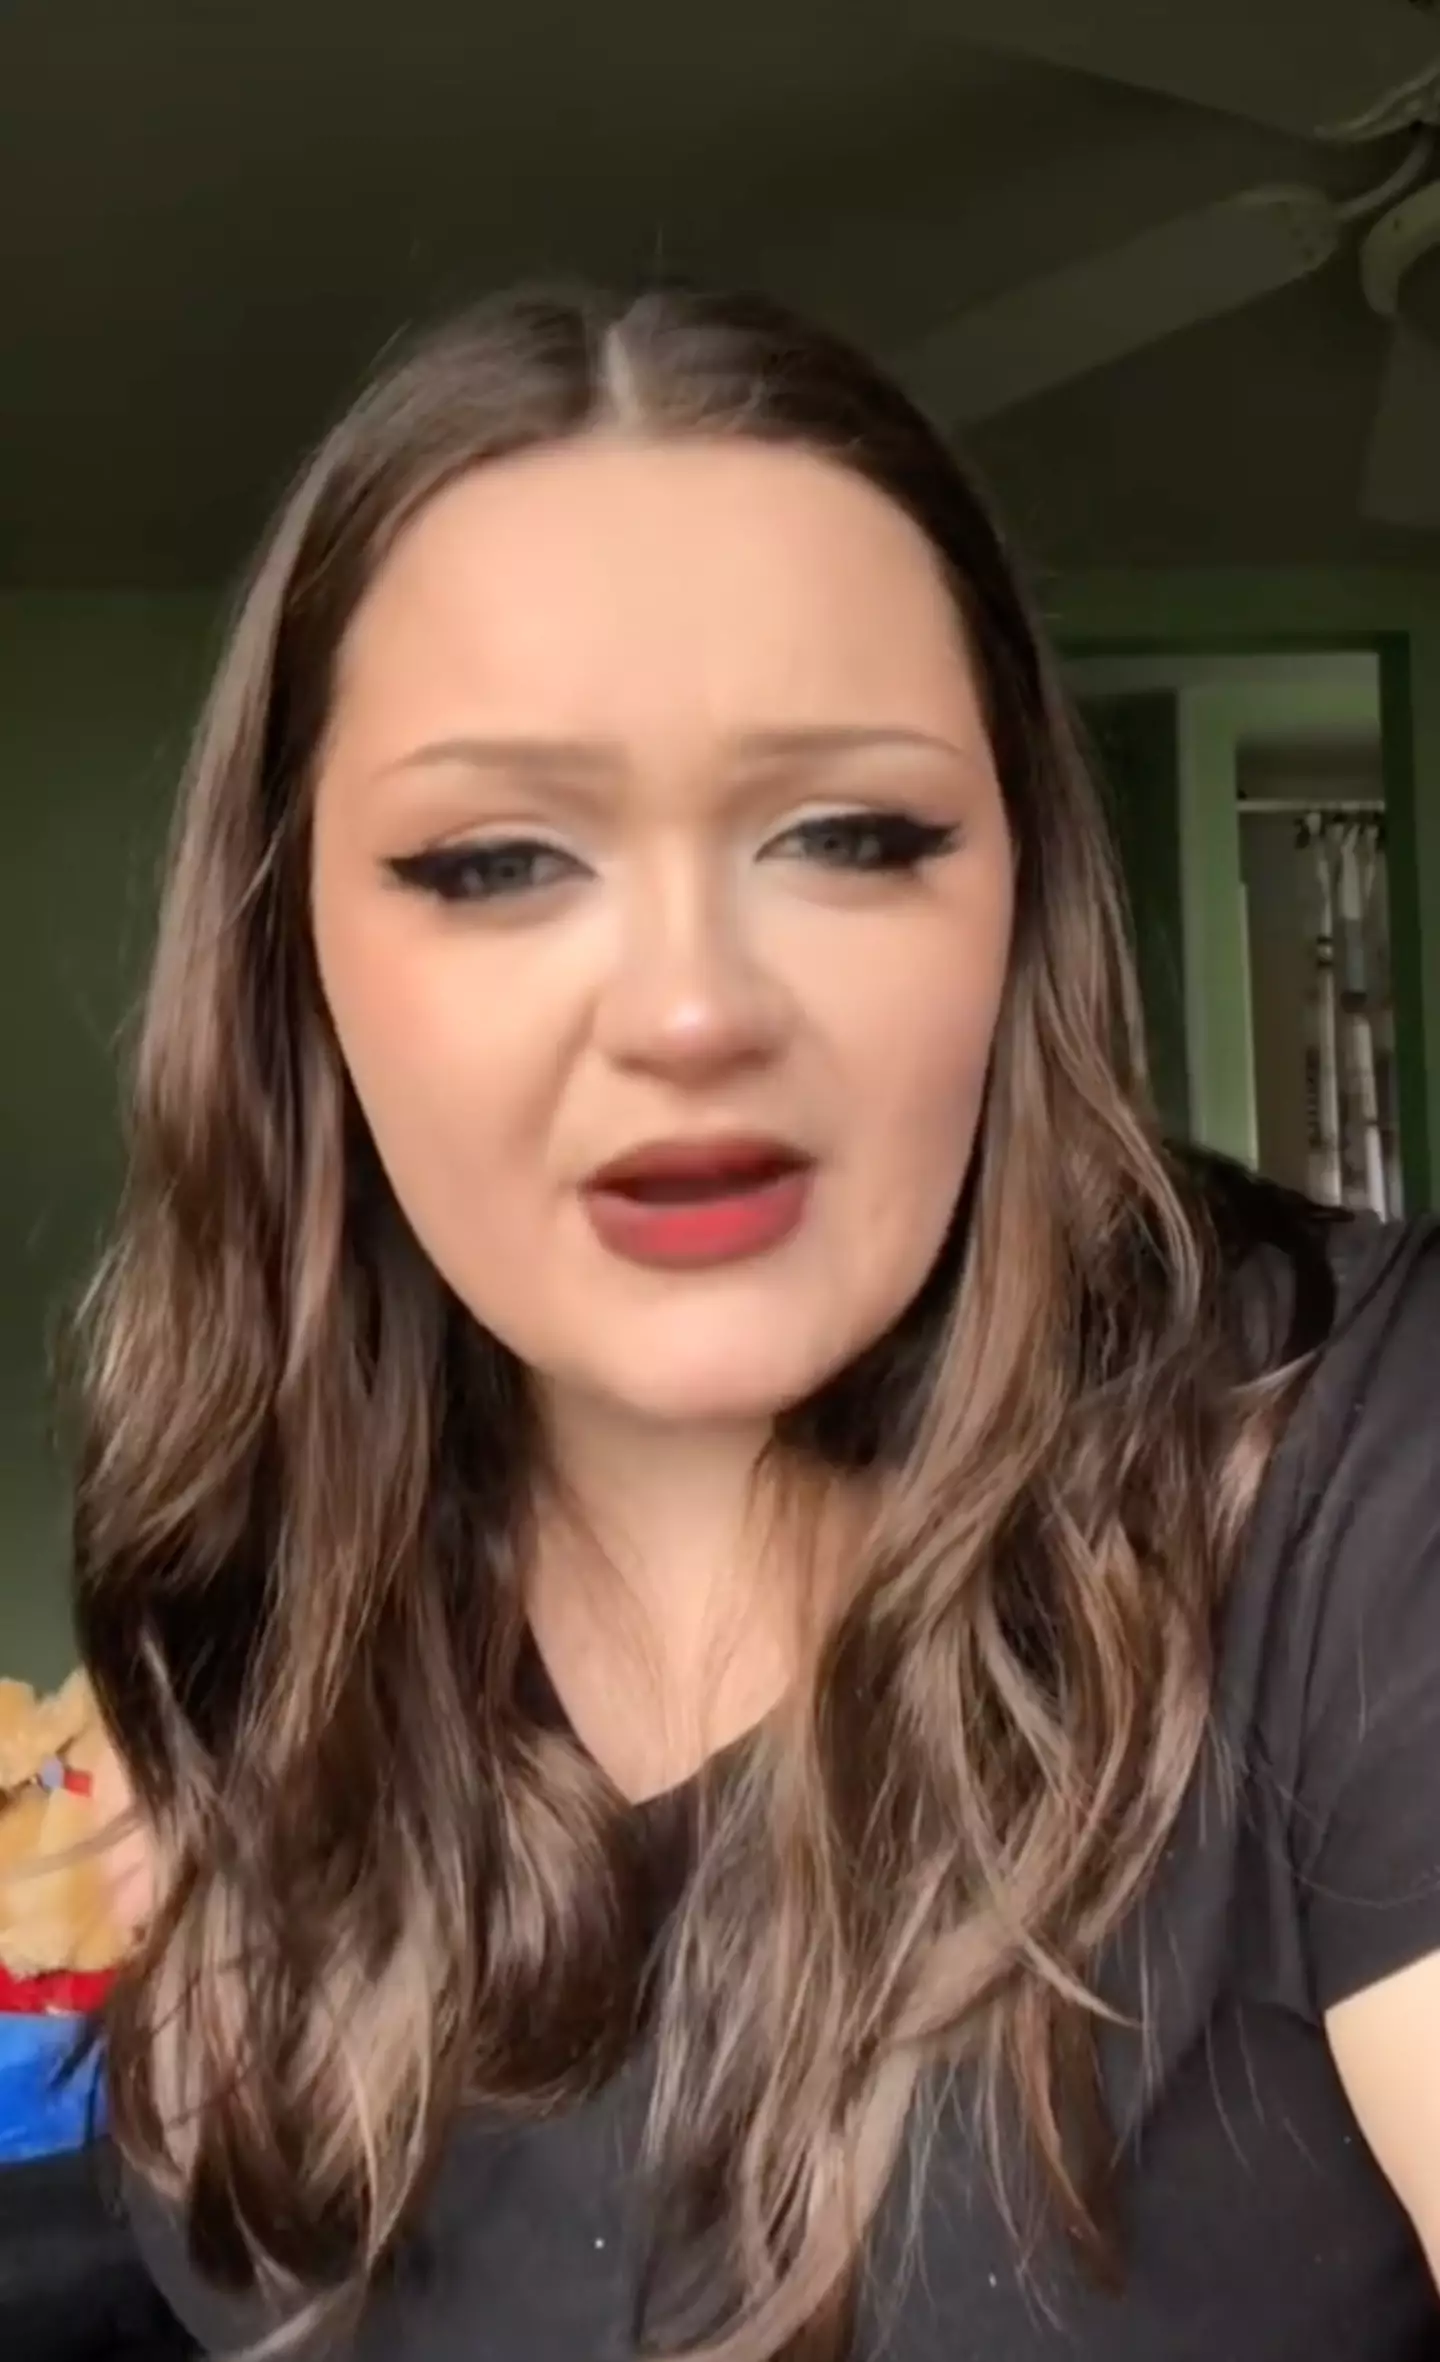 The woman told her embarrassing birth story on TikTok.